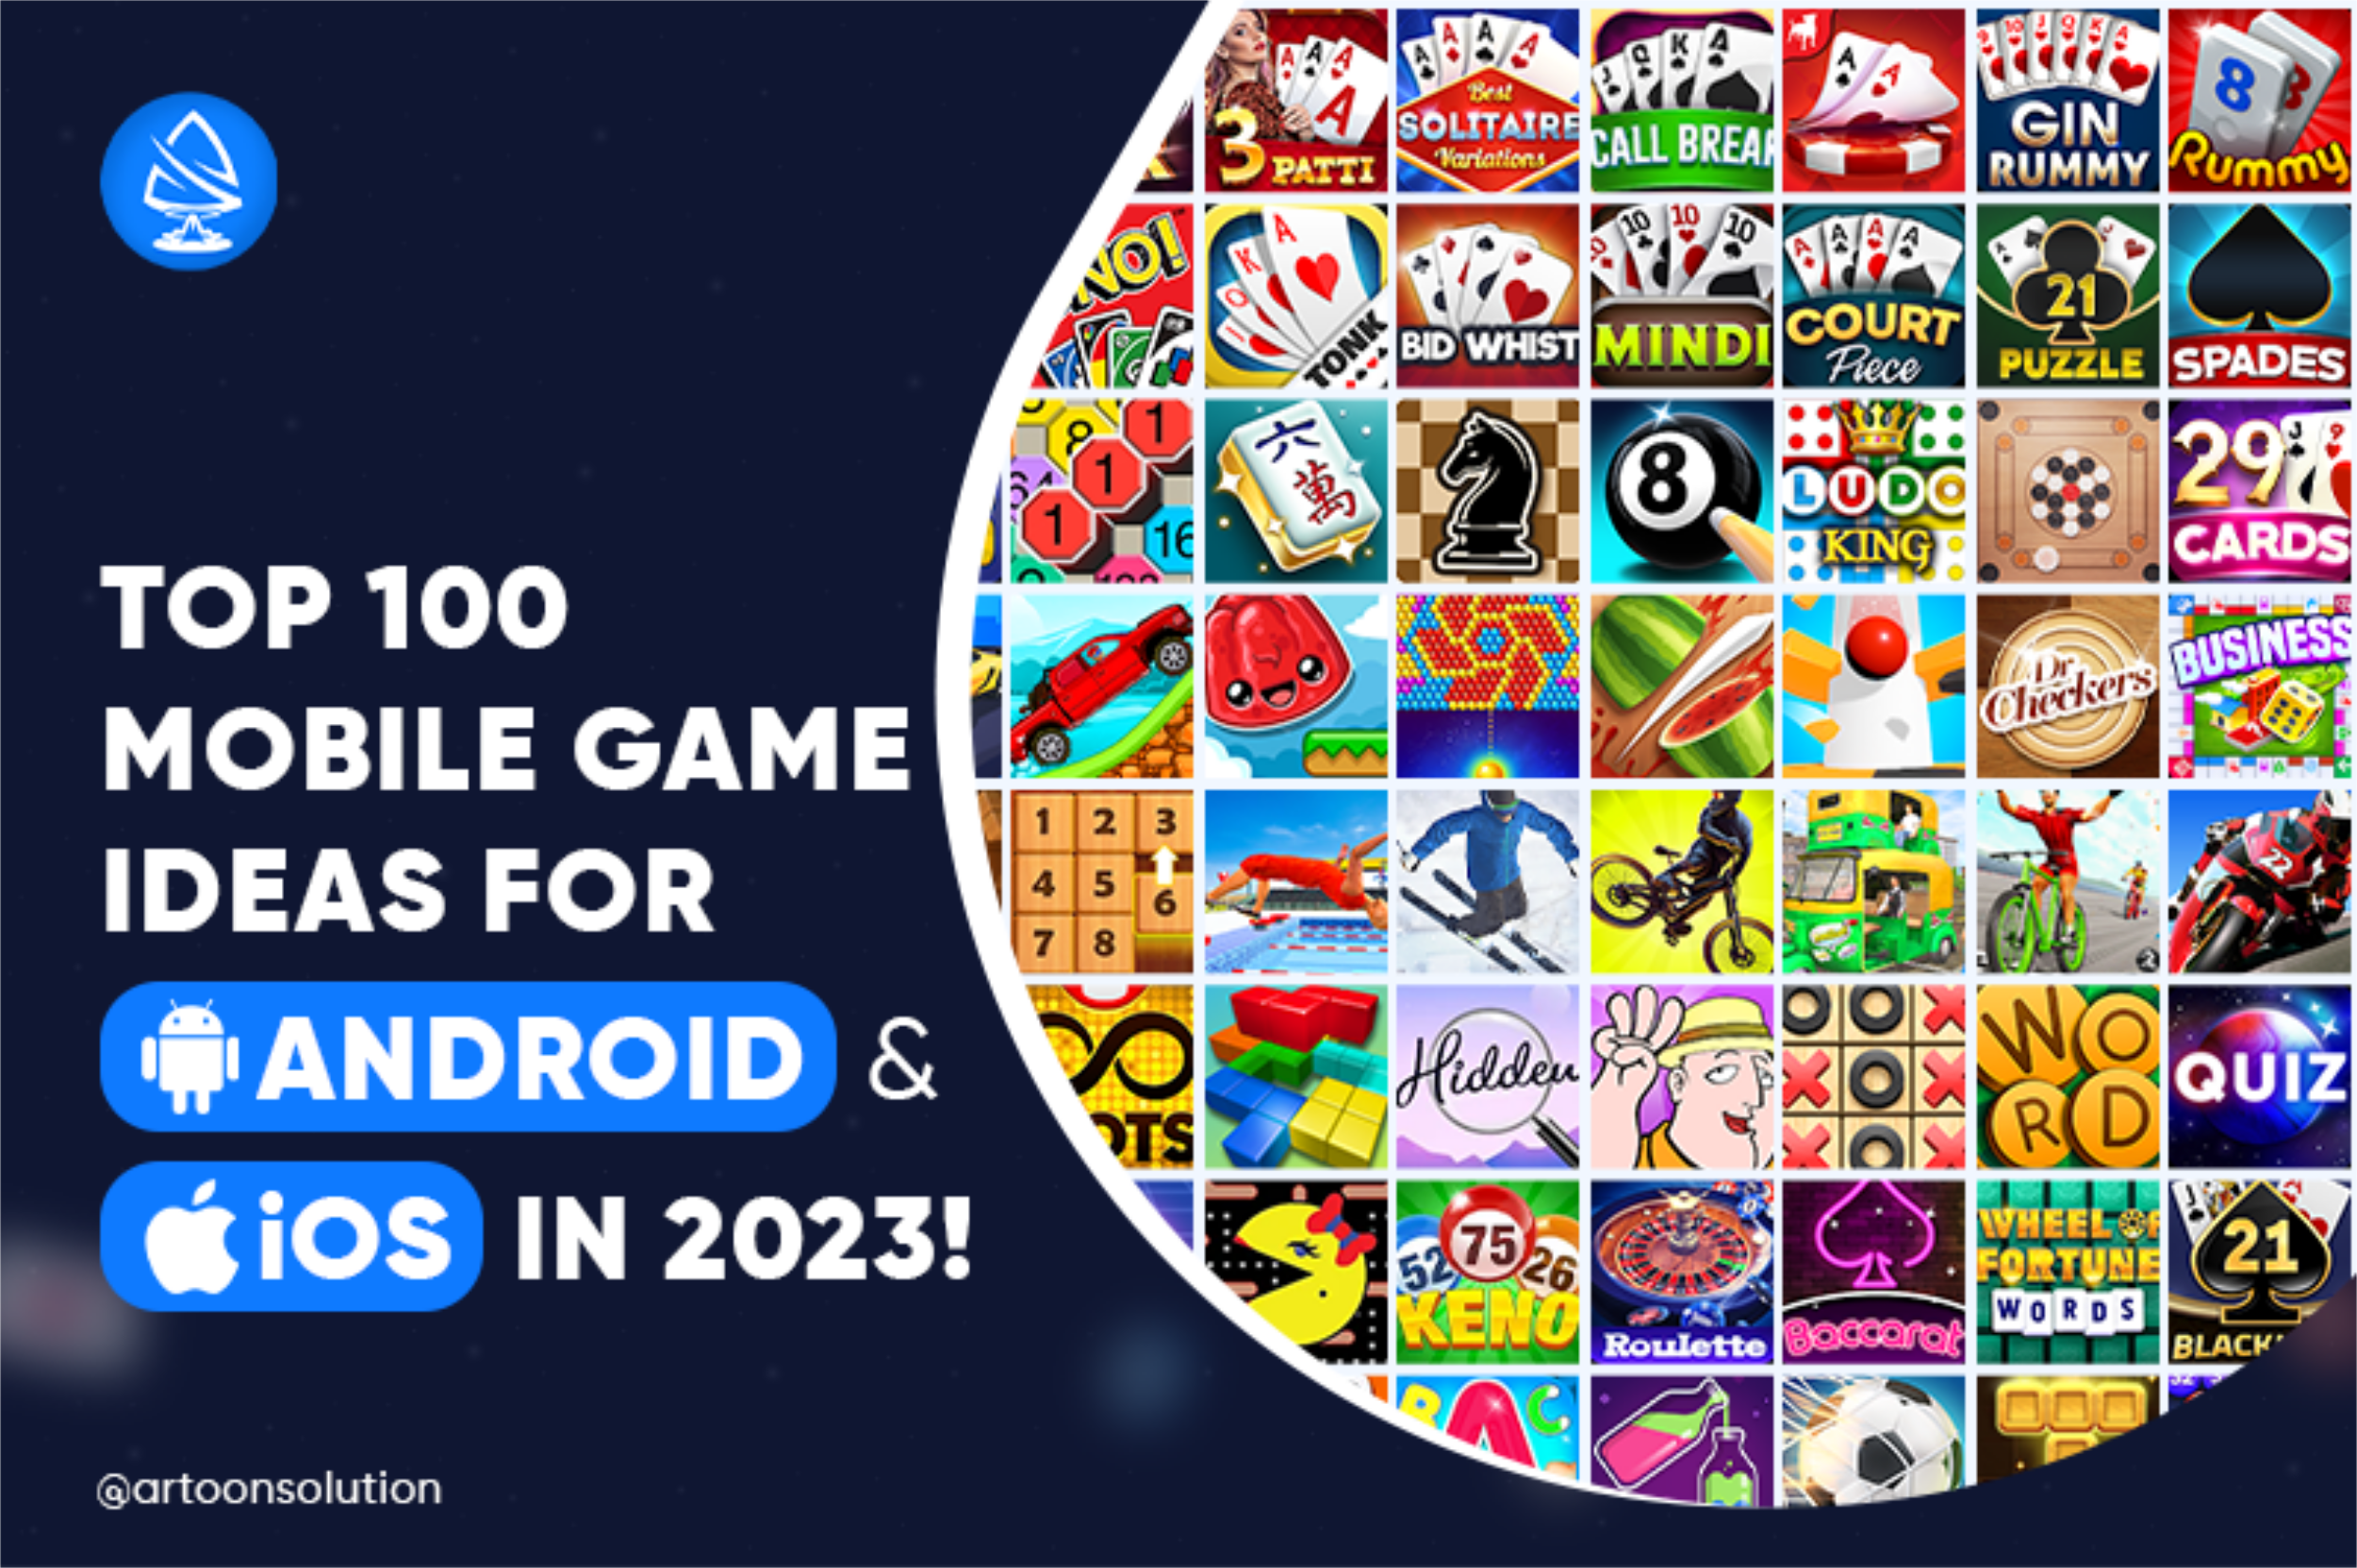 Top Games to Play When Bored on Your Smartphone in 2023